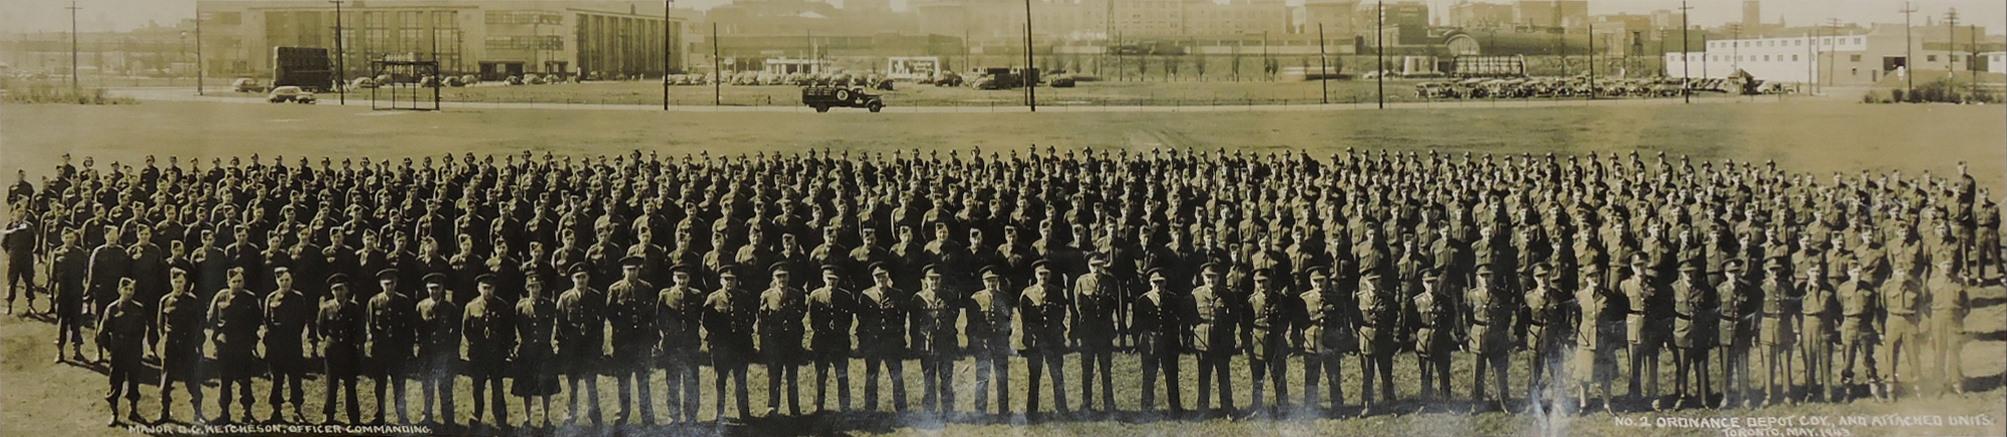 No. 2 Ordnance Department Company and Attached Units, Toronto, May 1943.